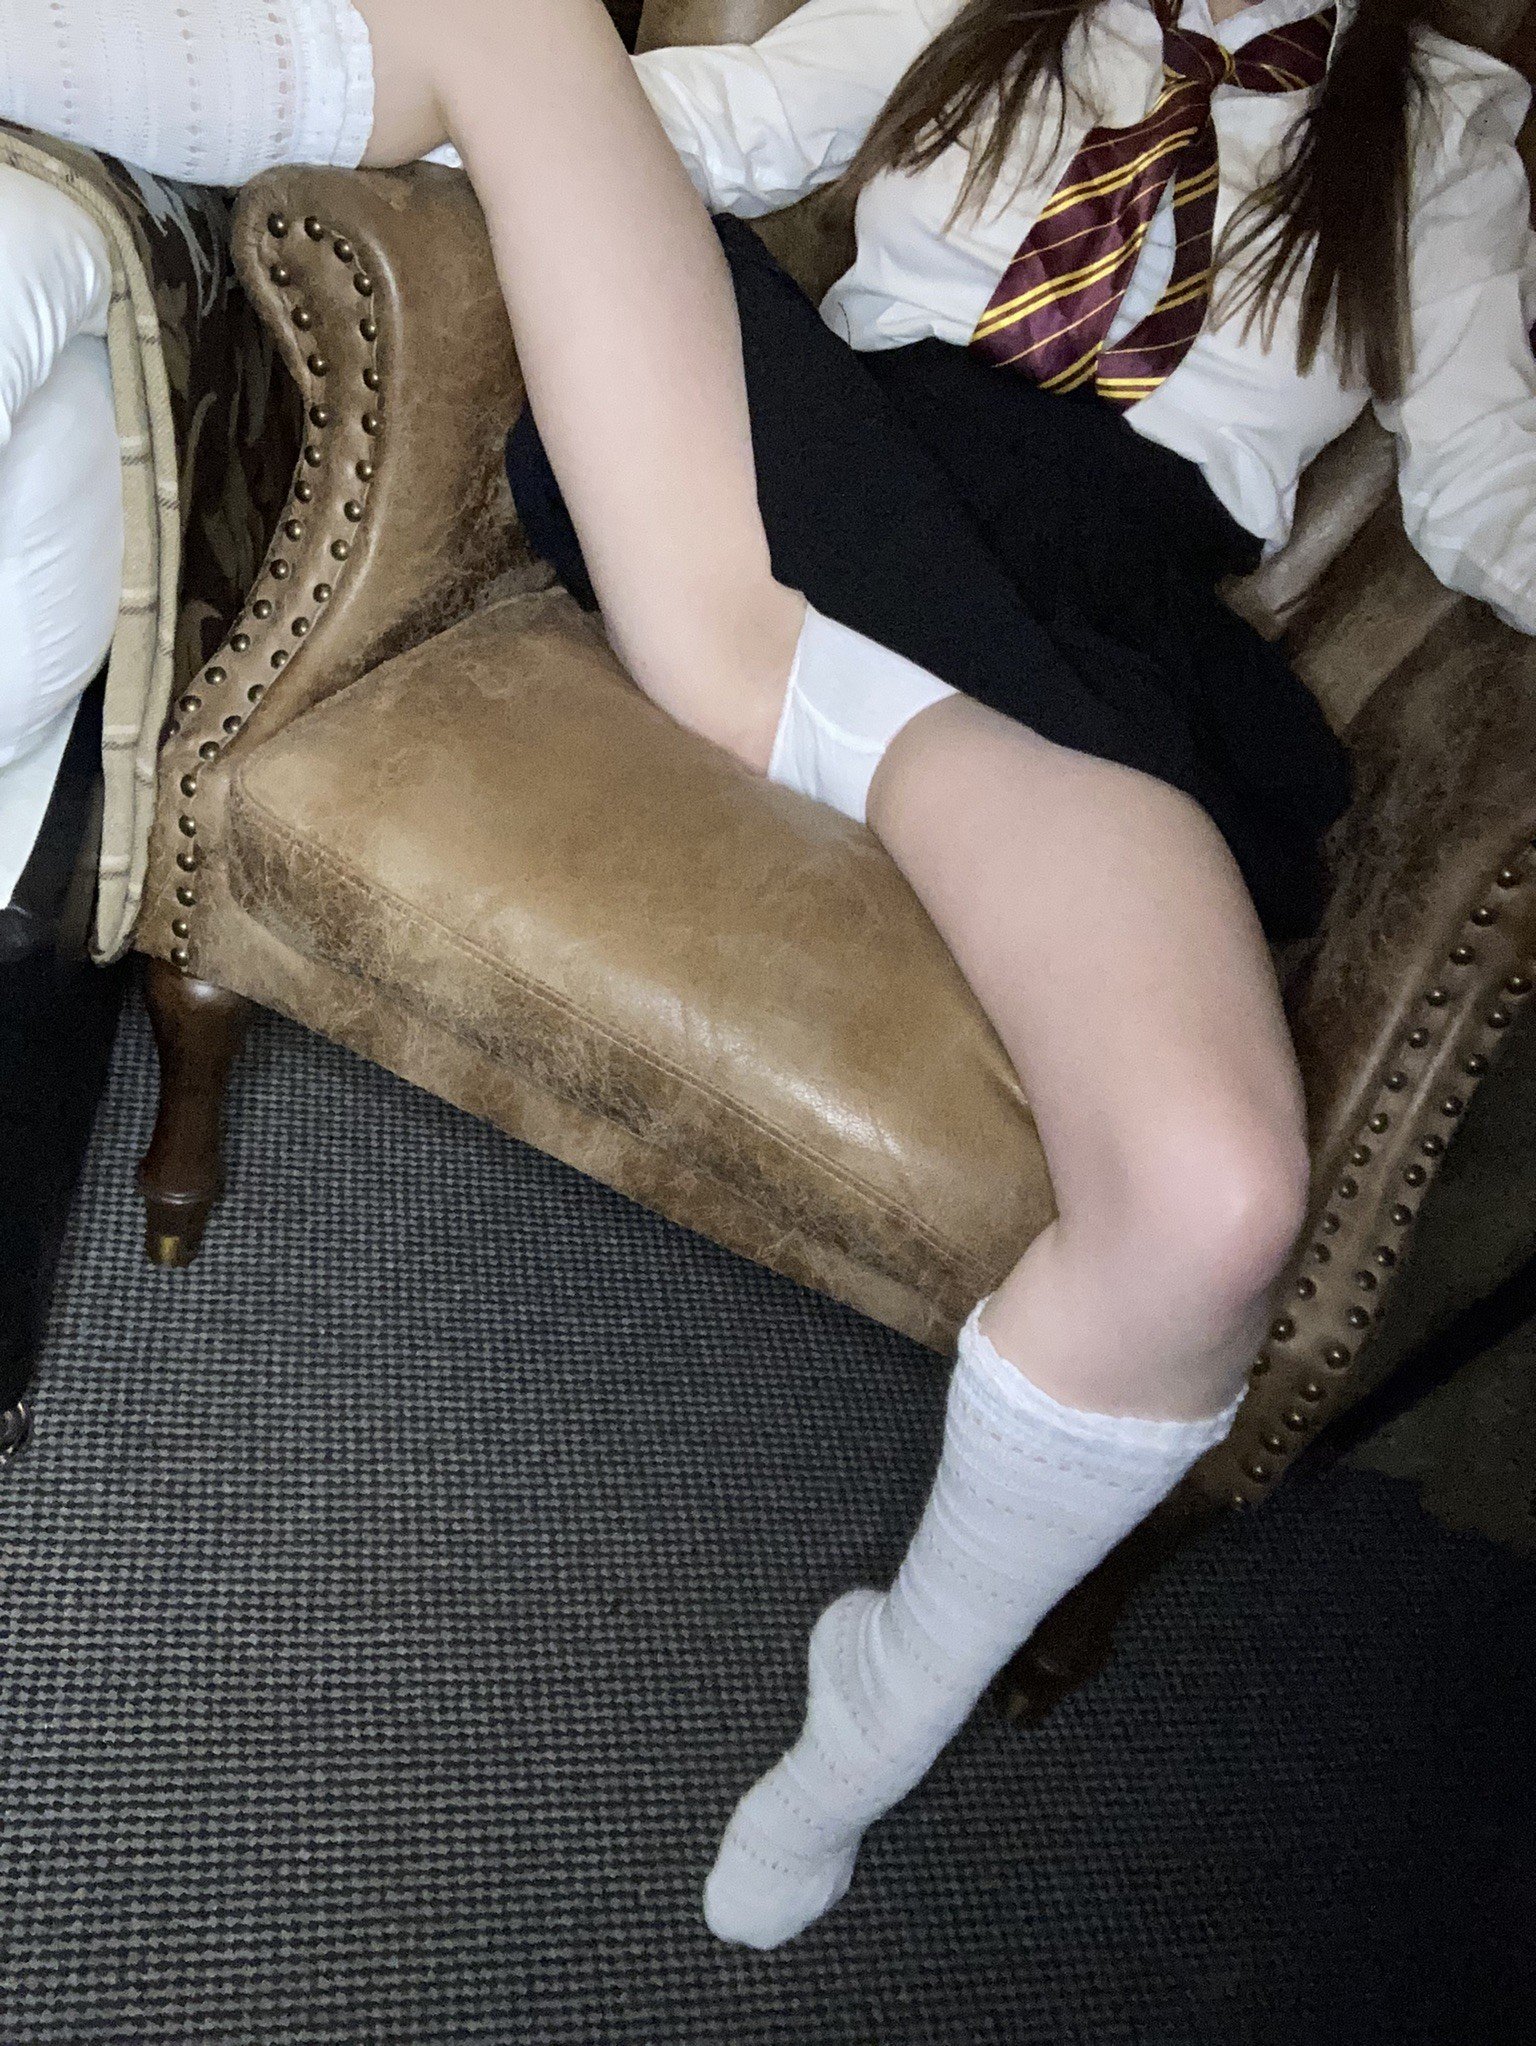 Photo by AdultWork with the username @AdultWork, who is a brand user,  September 21, 2022 at 7:55 PM. The post is about the topic Schoolgirls and the text says 'Get on cam with TinyTeenJessica here: https://aws.im/23vc

#AdultWork #daddysgirl #teengirl #camgirl #cammodel #webcam'